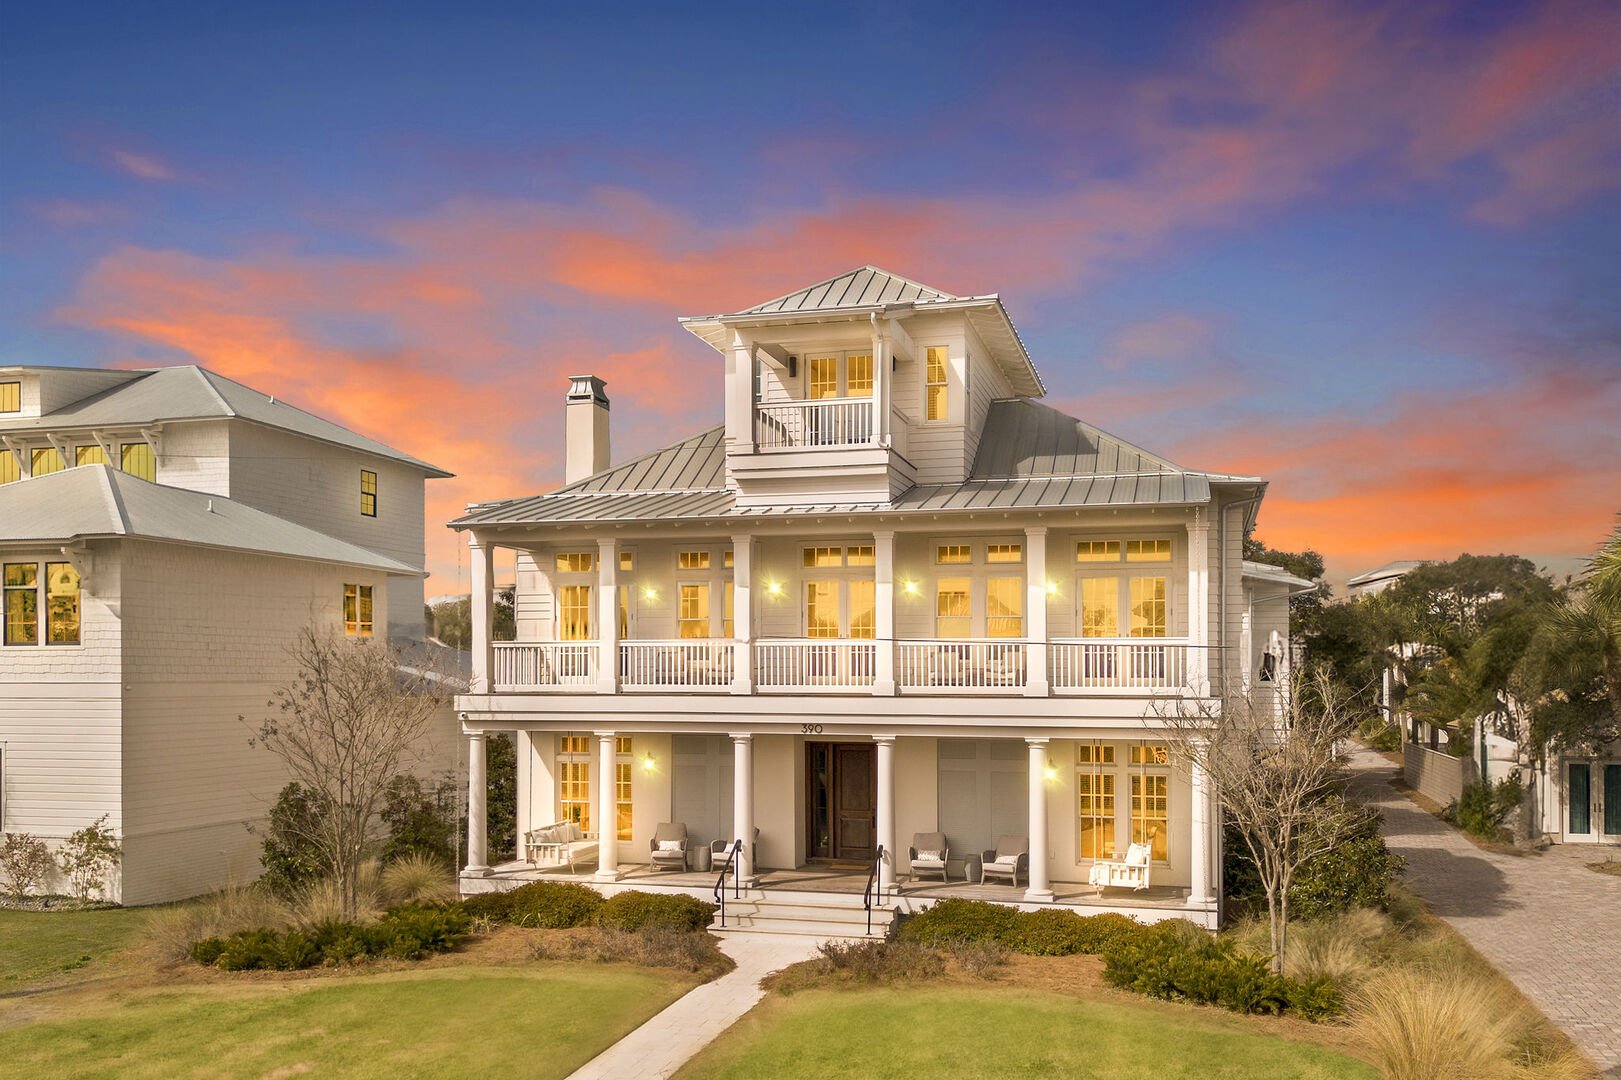 Walton Rose is 3 stories and minutes from Rosemary Beach!